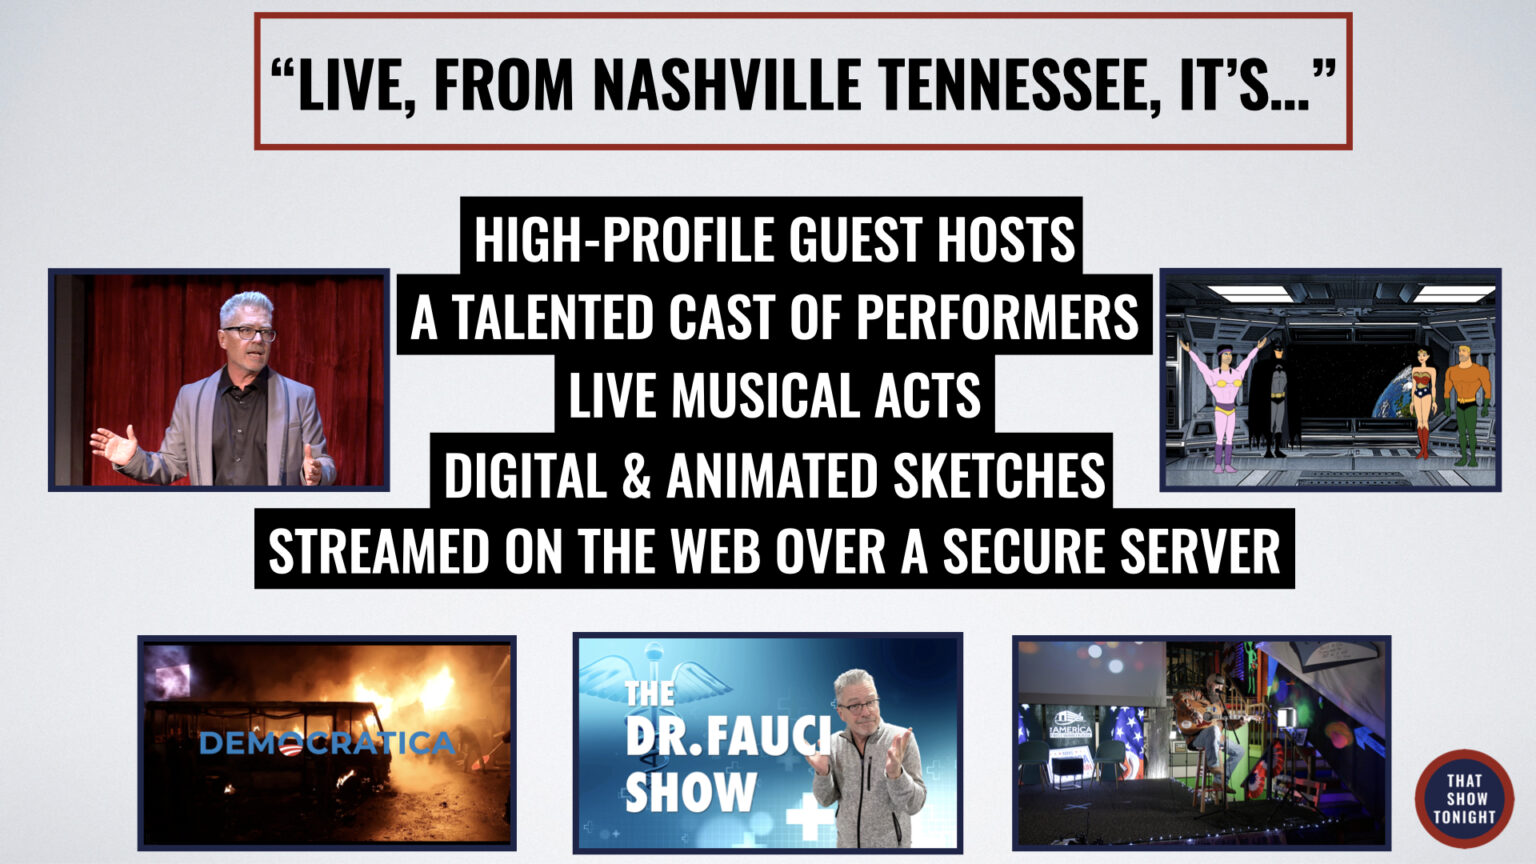 That Show Tonight Pitch Deck - 04